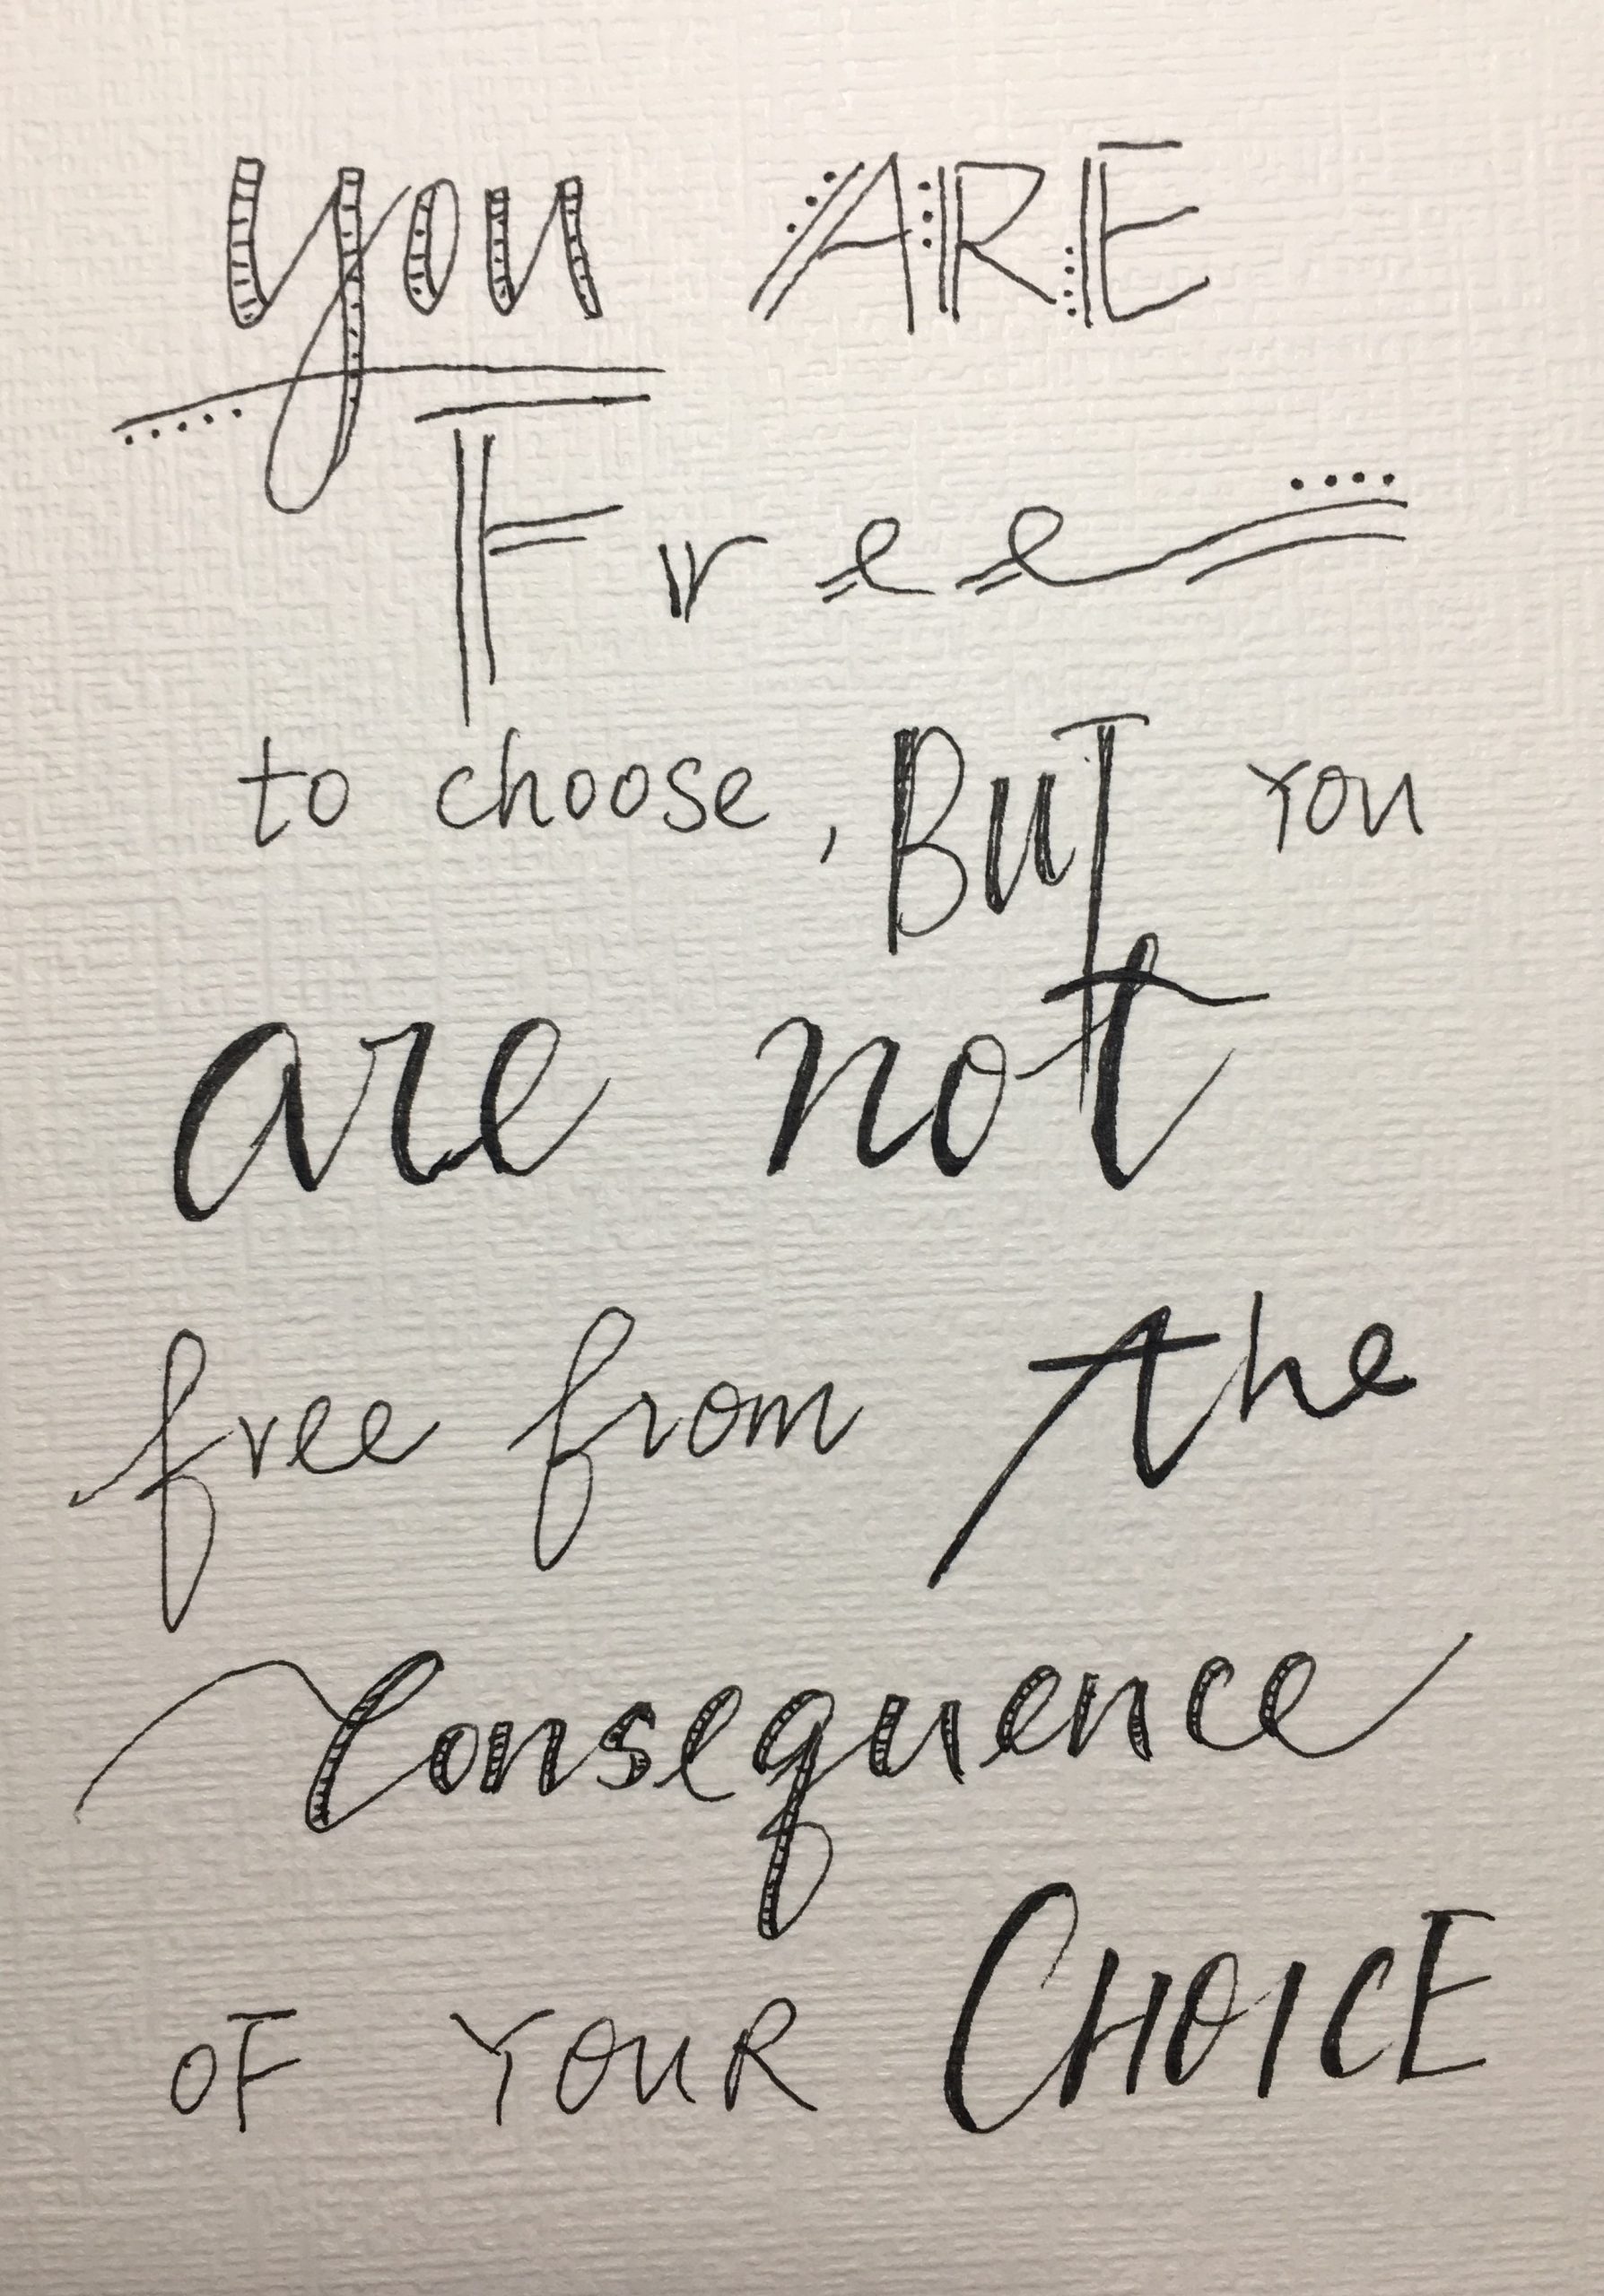 You are Free to Choose, But You are Not Free From the Consequence of Your Choice